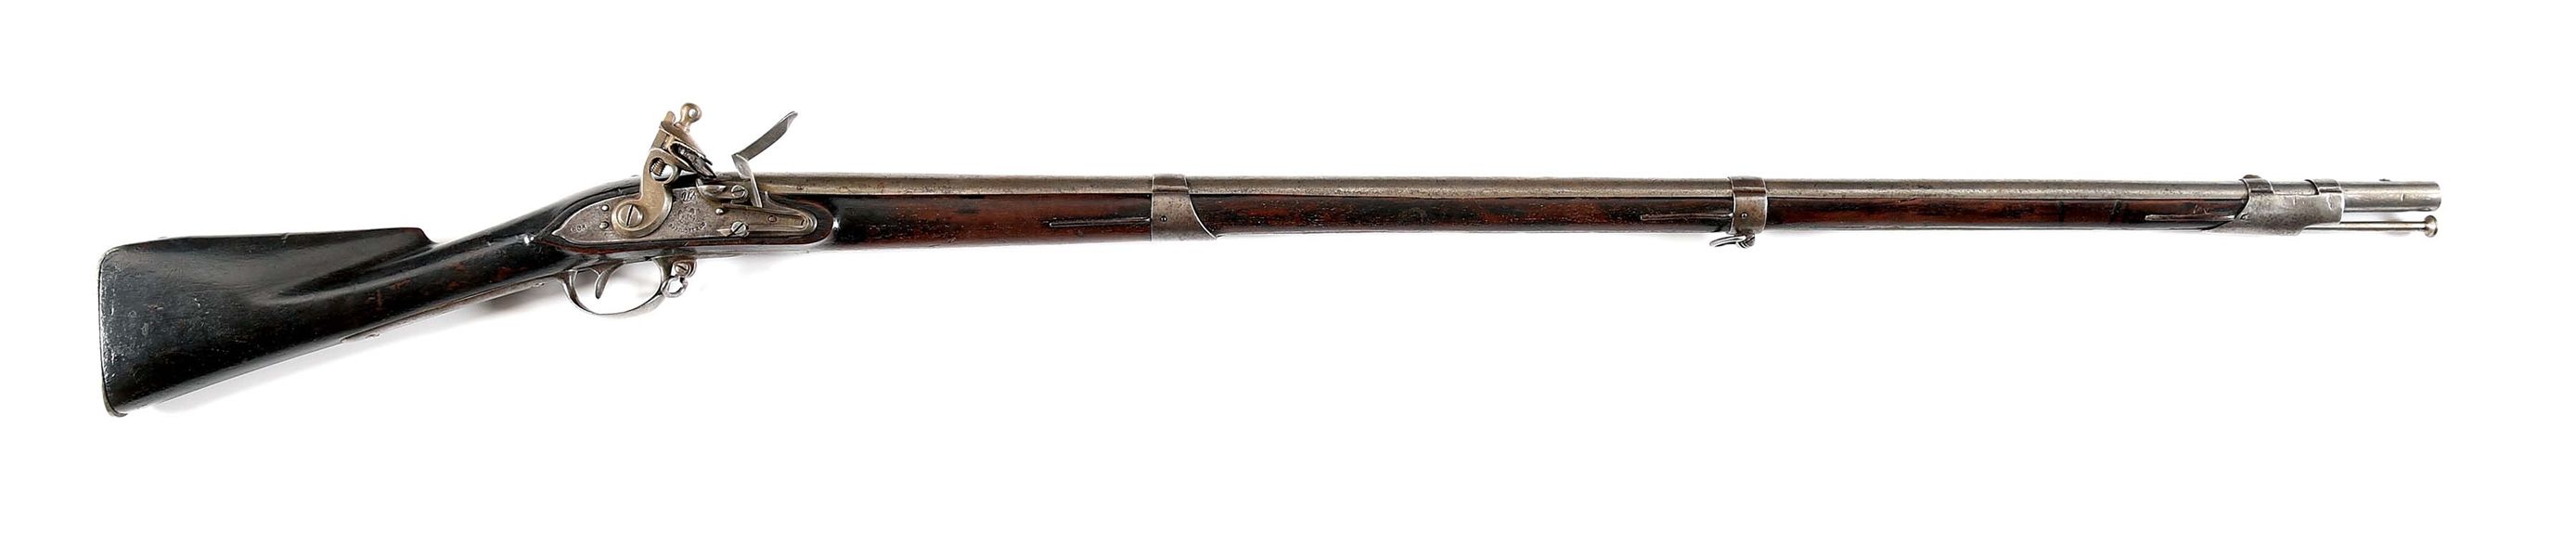 (A) US M1795 FLINTLOCK MUSKET BY SPRINGFIELD DATED 1808.